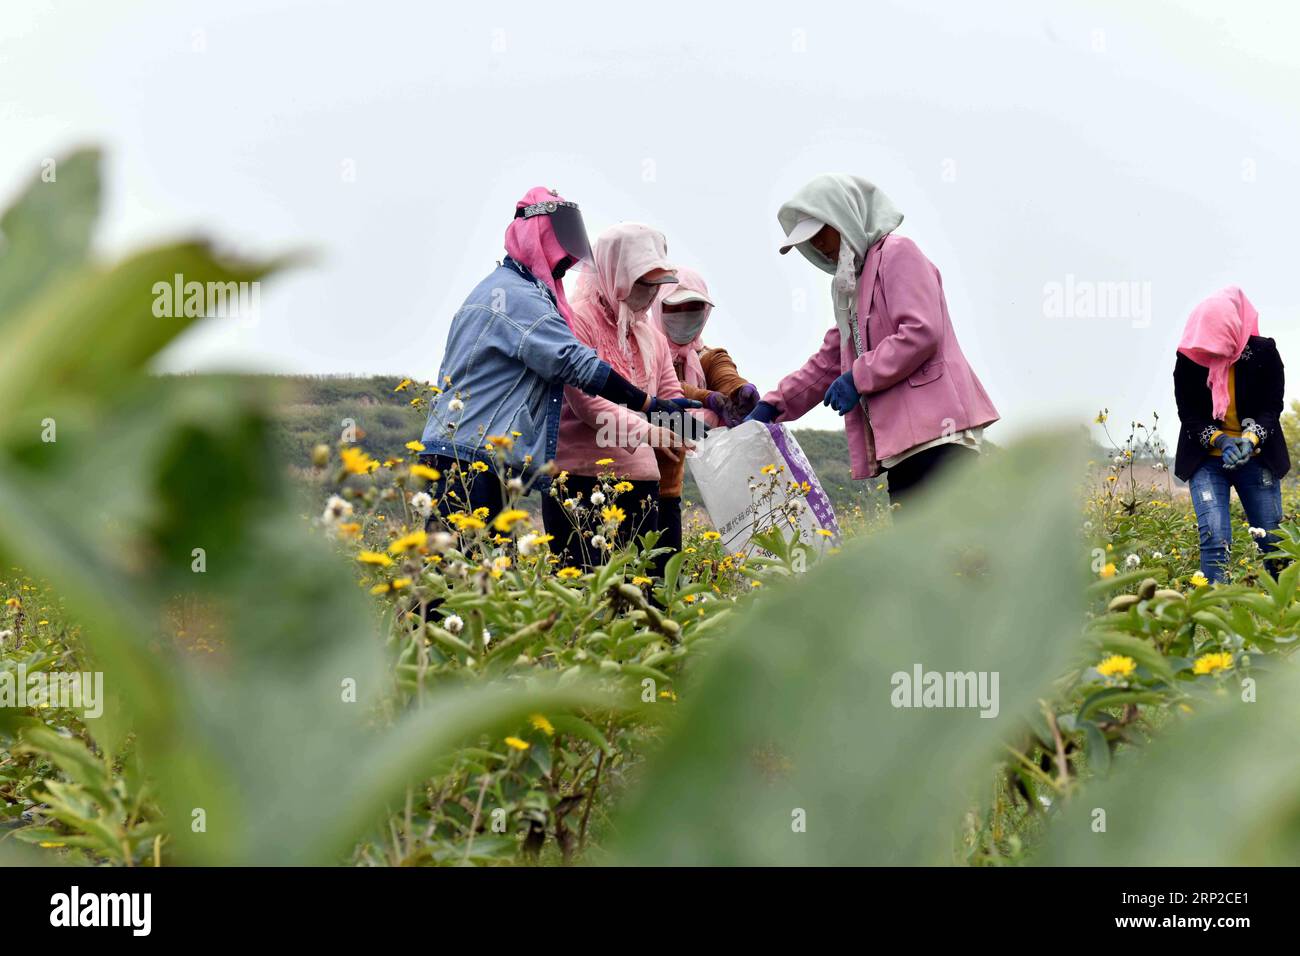 (180830) -- GUYUAN, Aug. 30, 2018 (Xinhua) -- Farmers pick peony flower seeds for oil manufacturing at a planting base in the Yuanzhou District of Guyuan City, northwest China s Ningxia Hui Autonomous Region, Aug. 28, 2018. Yuanzhou government started to cooperate with the peony seed oil company Ruidanyuan in 2014 to establish a peony planting base for processing and production of peony products on barren mountains. So far, the planting base has created over 300 job opportunities for impoverished locals and achieved sound improvements on environmental protection. (Xinhua/Guo Xulei) (hxy) CHINA Stock Photo